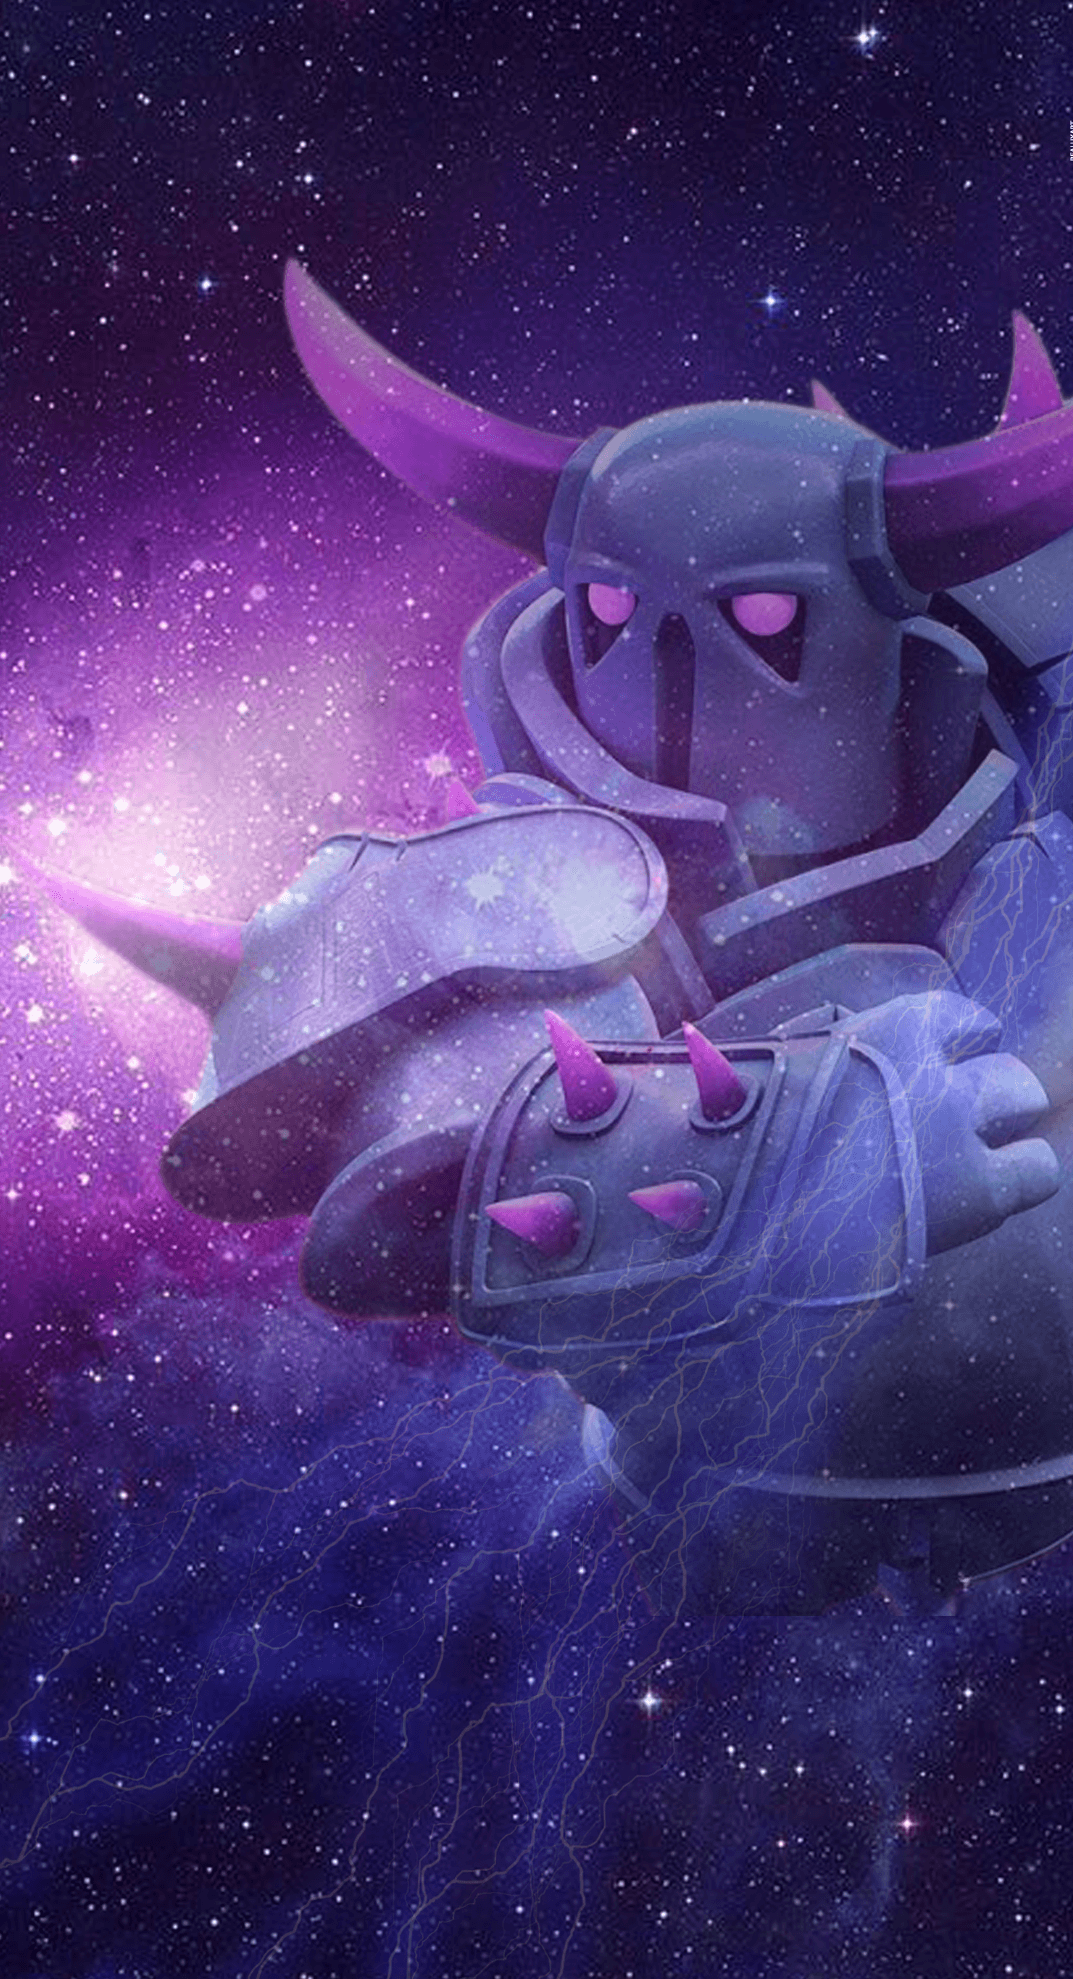 PEKKA wallpaper by Realuxart (me)! Comment below which wallpaper you